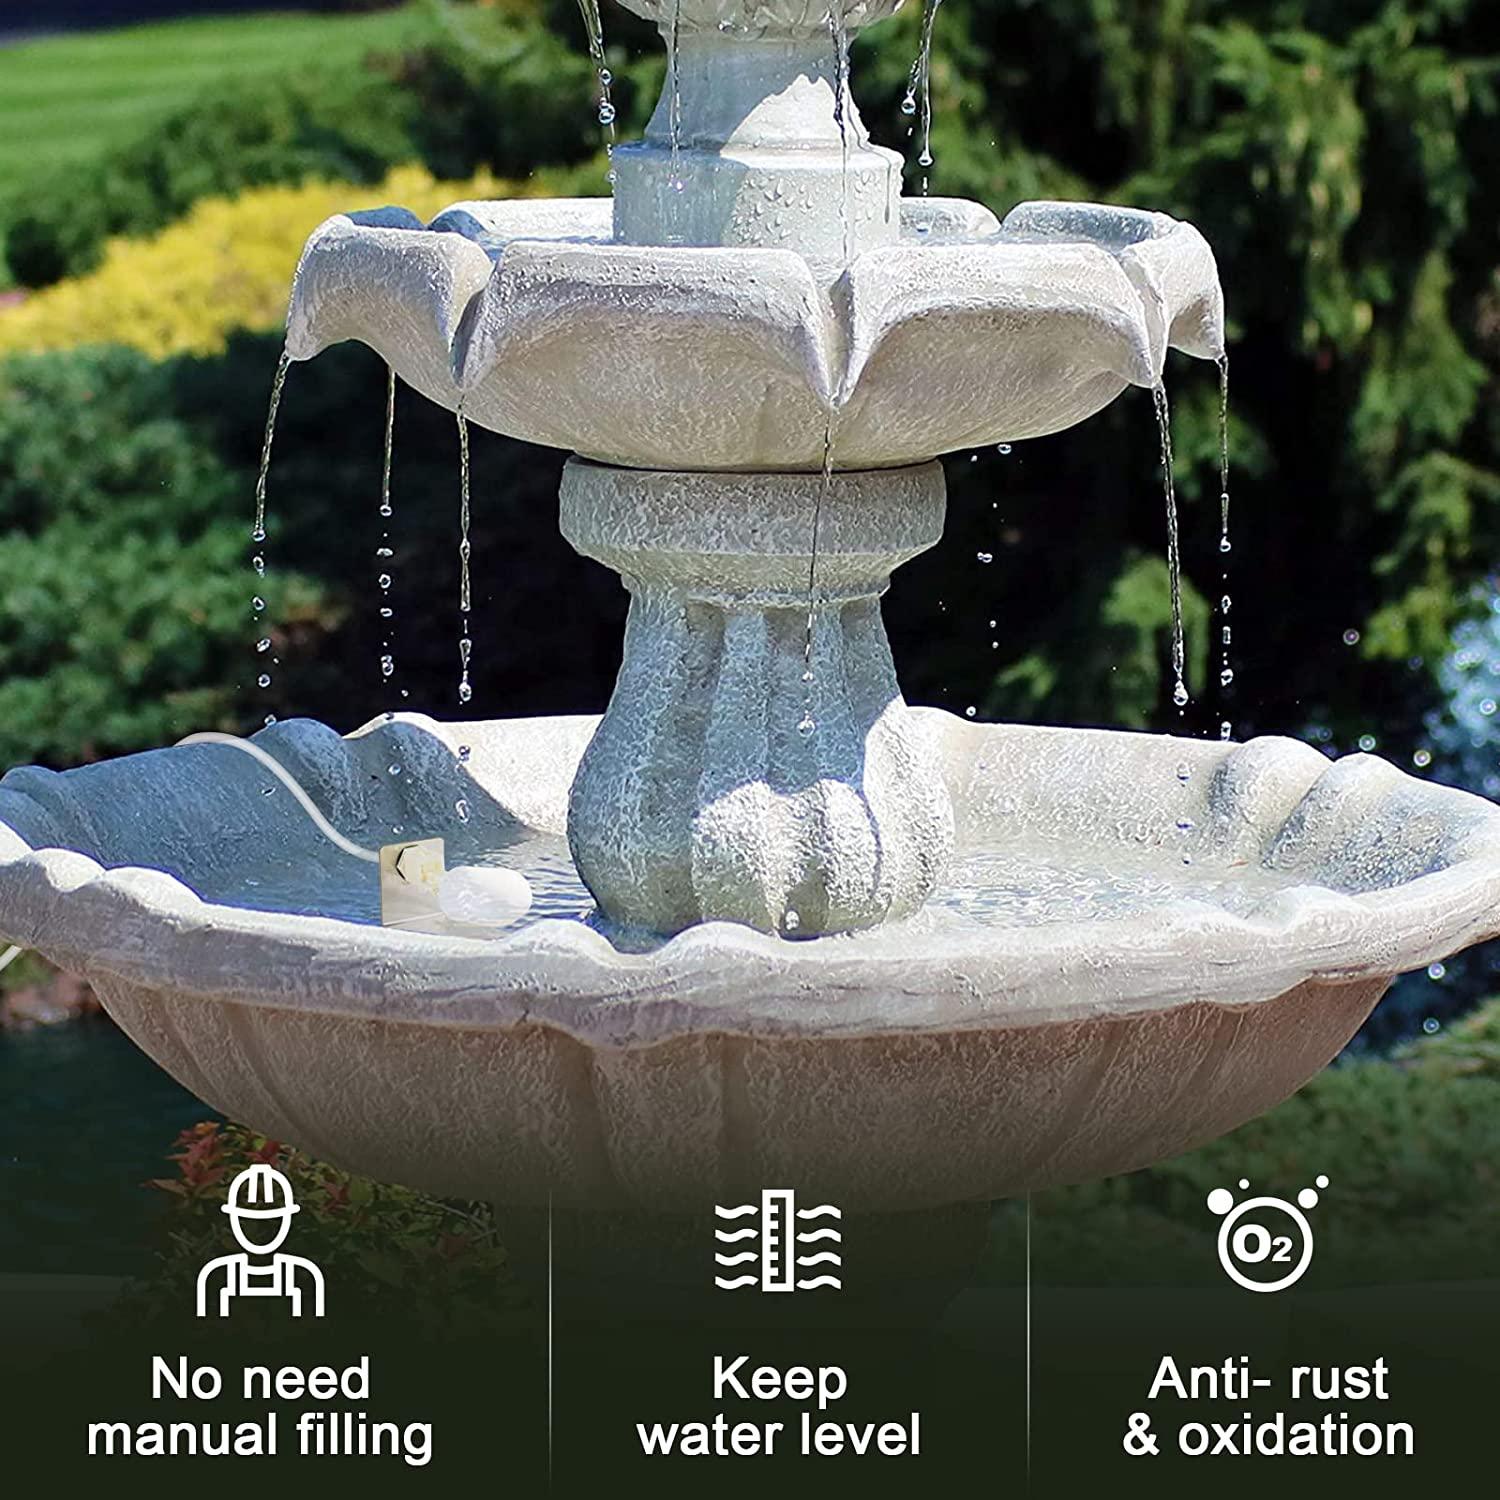 briidea Water Fountain Auto Fill System, Water Leveler Float Valve Kit, 1/4 Tube with Adjustable Arm for Outdoor Fountains, Gardens, Ponds